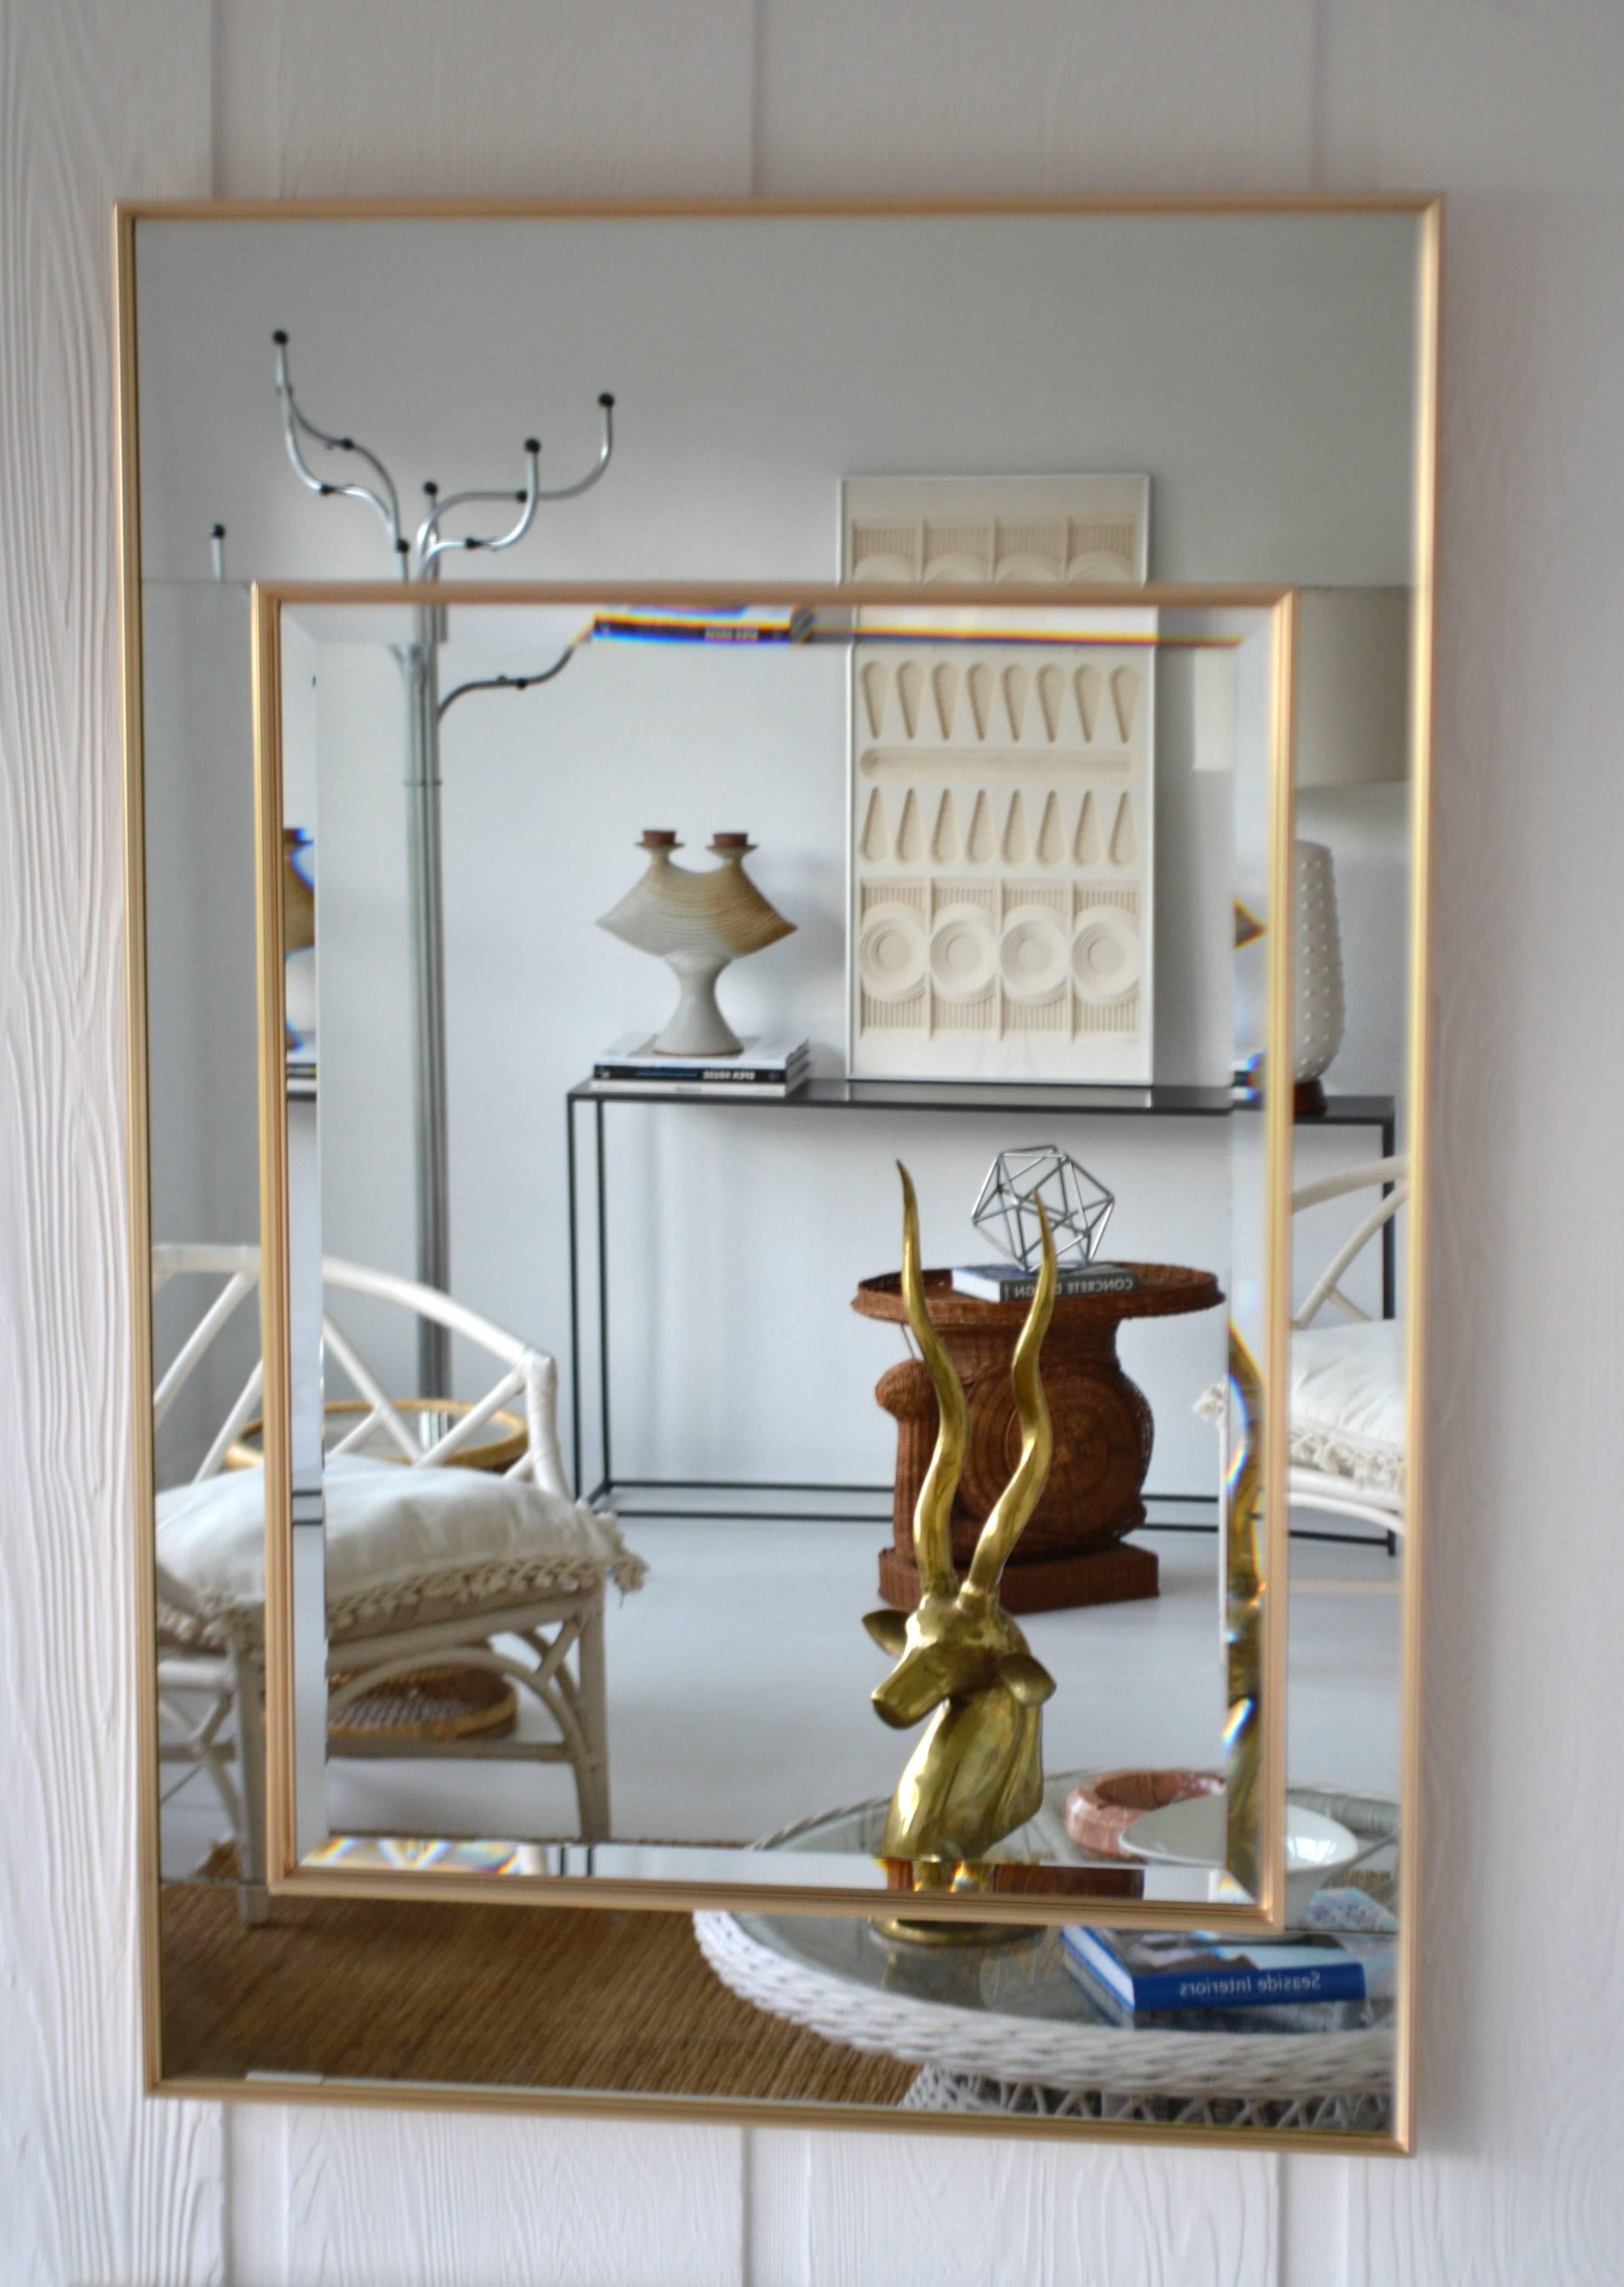 Glamorous Hollywood Regency style wall mirror by La Barge, circa 1980s. This stunning large-scale mirror-framed mantel mirror is designed with mirrored panels encased in reeded brass frames surrounding an inset beveled mirror.